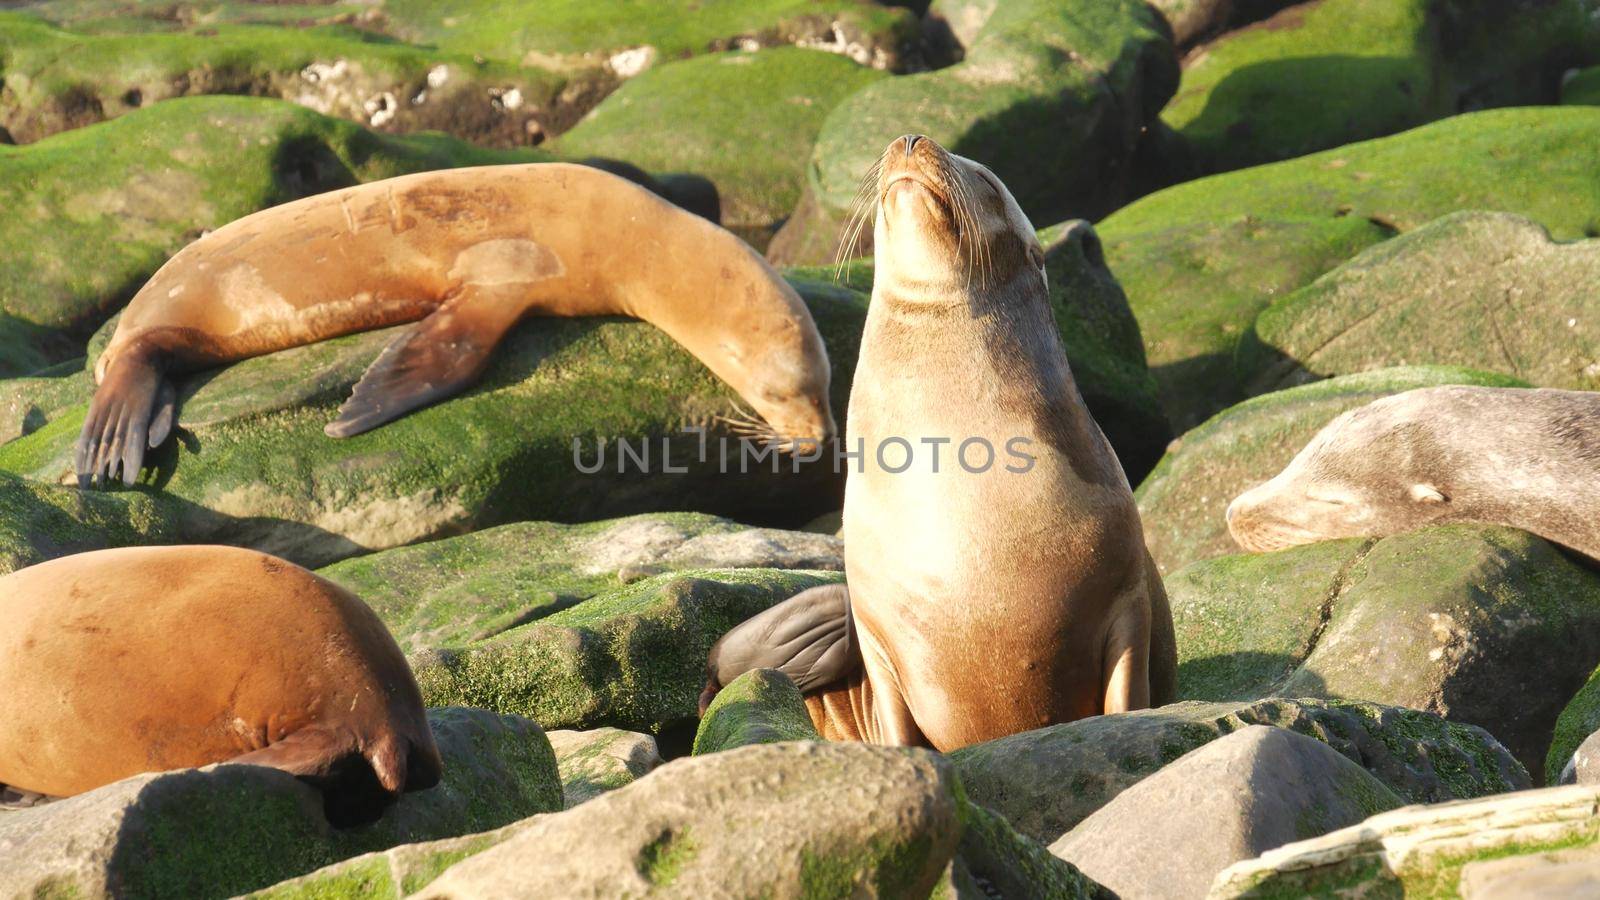 Sea lion on the rock in La Jolla. Wild eared seal resting near pacific ocean on stone. Funny wildlife animal lazing on the beach. Protected marine mammal in natural habitat, San Diego, California USA.